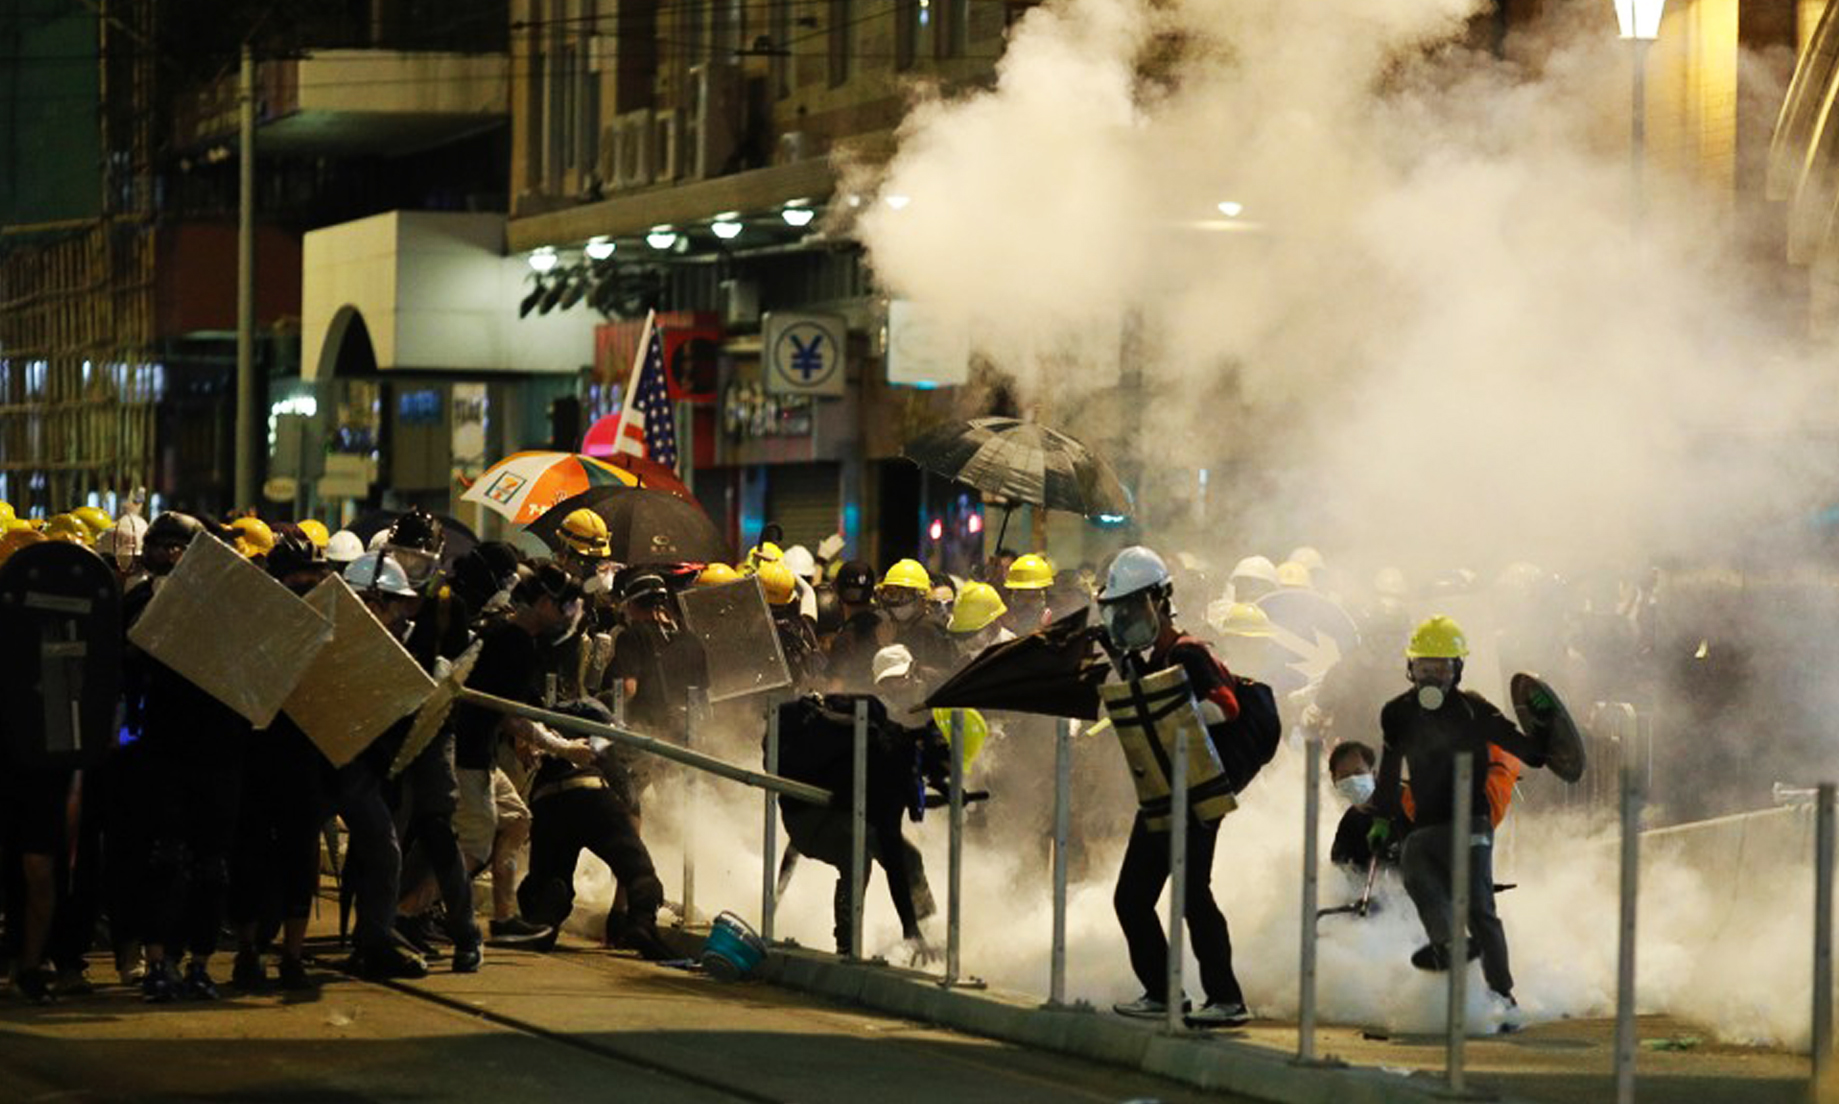 Tear gas, rubber bullets fired at Hong Kong protesters near Beijing’s office